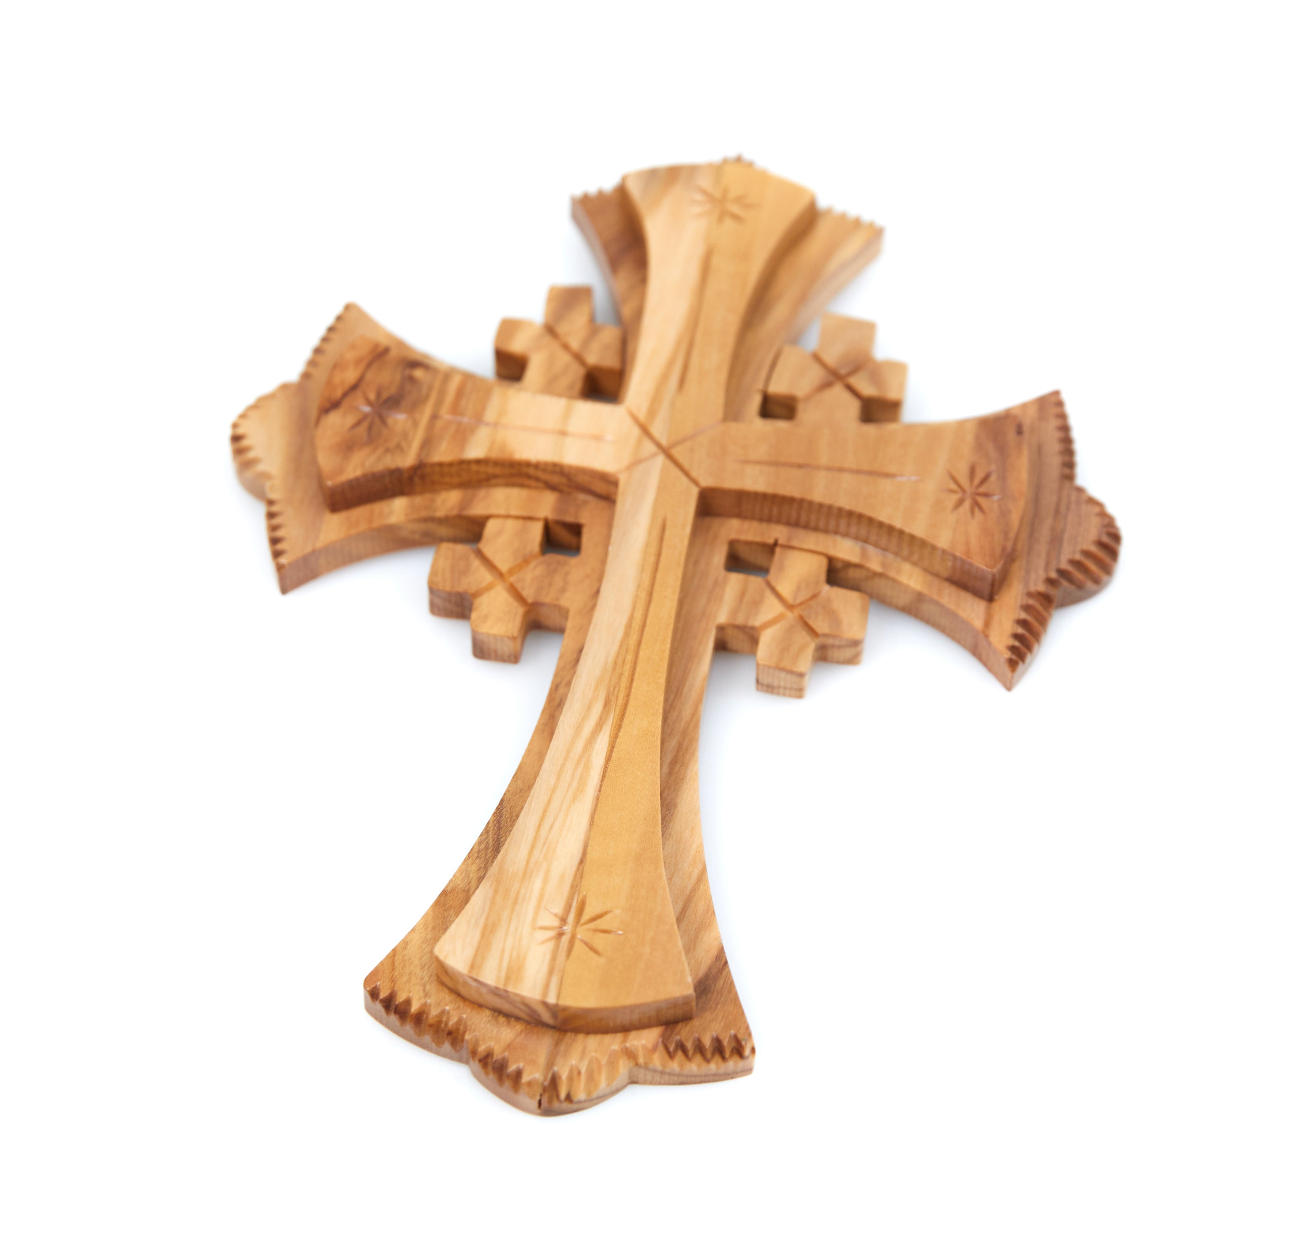 Jerusalem Olive Wood Wall Cross 7 Inches Home warming Gift Christian 